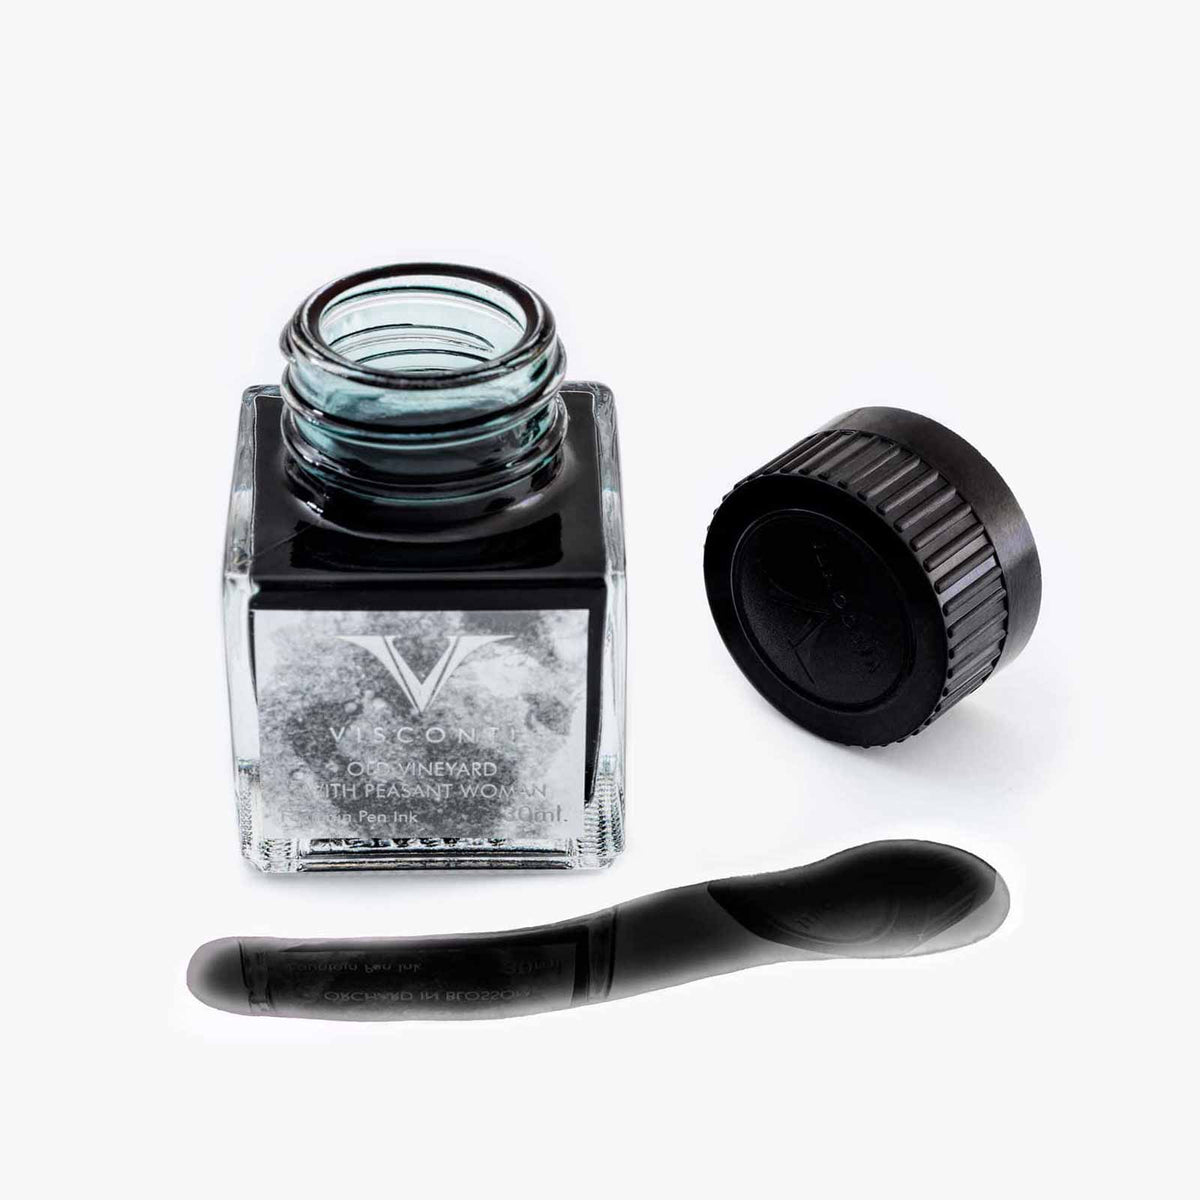 A bottle of Visconti Van Gogh Old Vineyard with Peasant Woman Ink in Grey with a brush next to it in the Coles of London Van Gogh Collection.